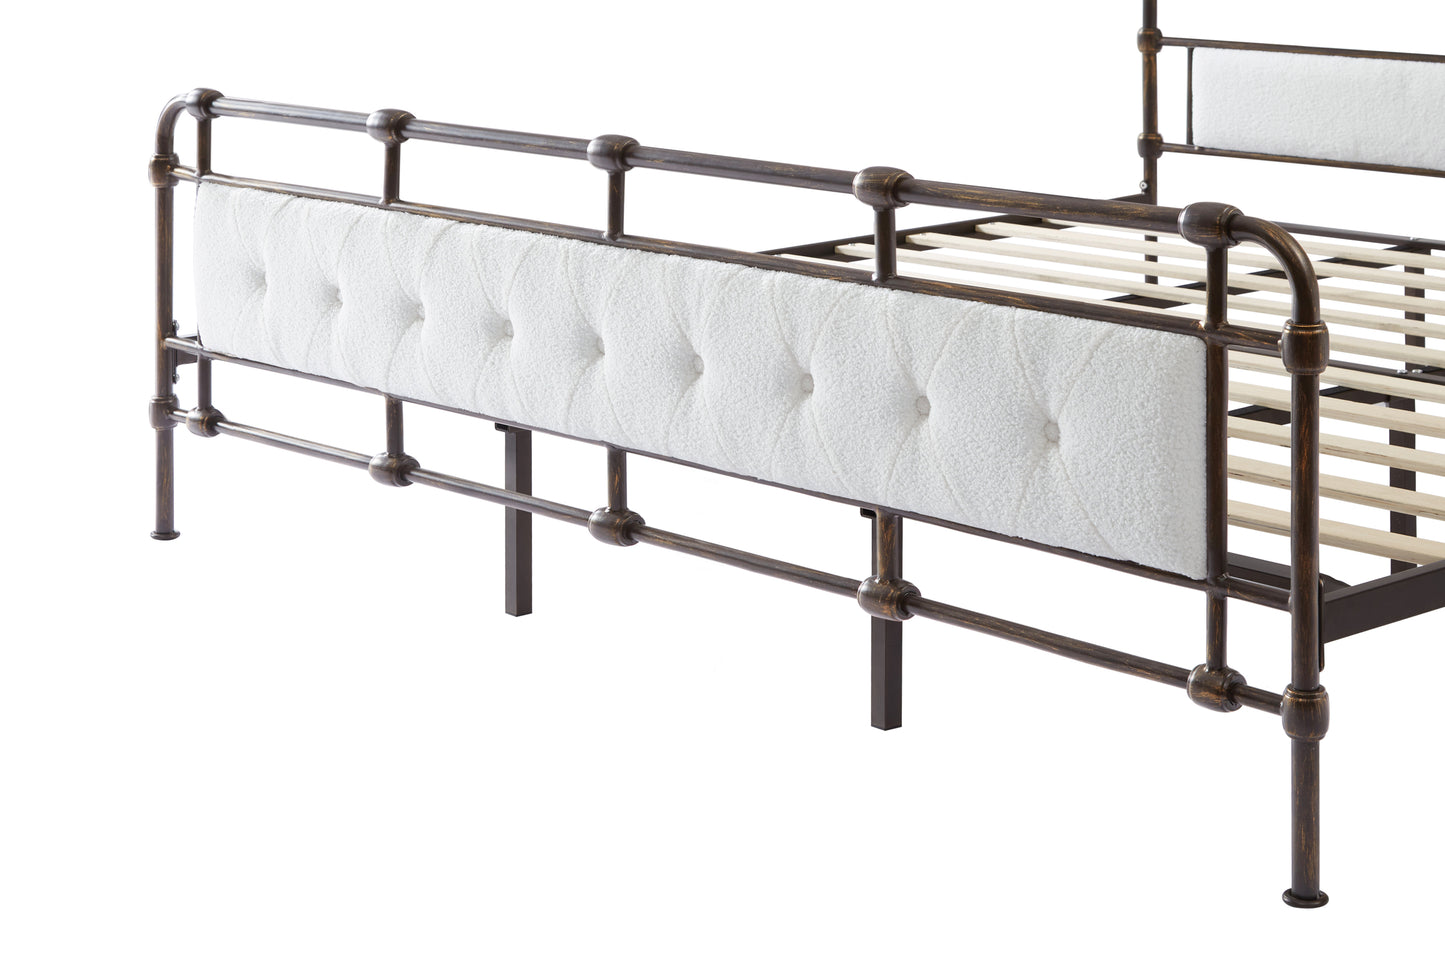 King- Metal Platform Bed with Upholstered Headboard and Tail